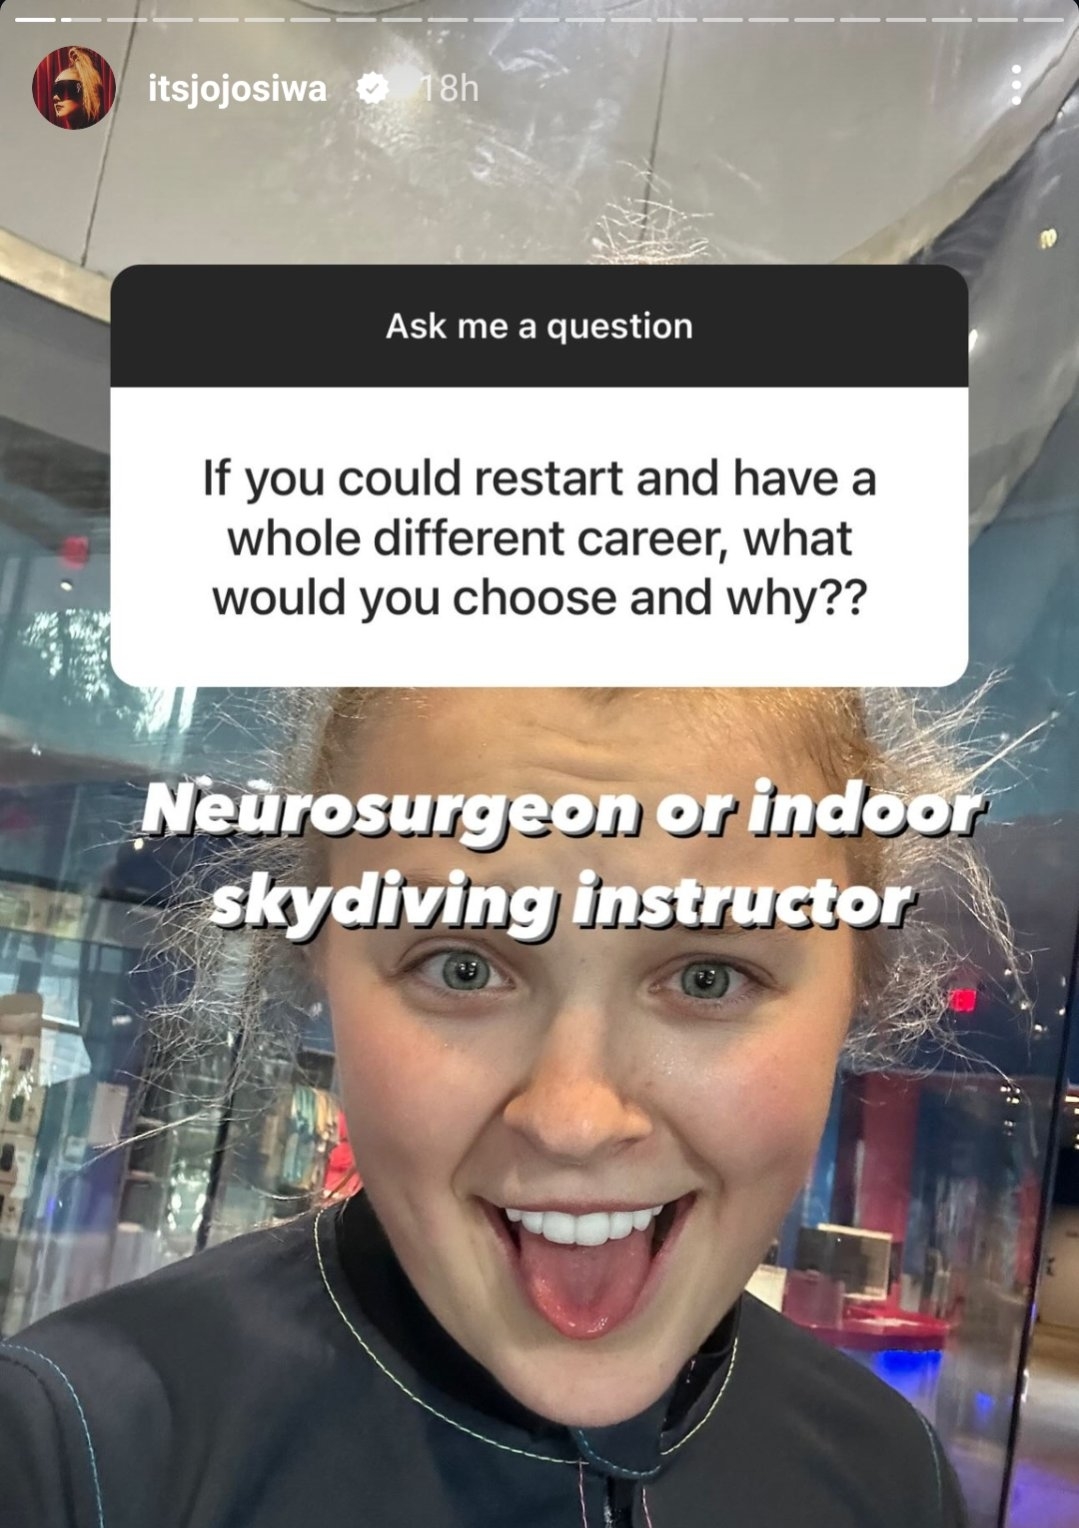 JoJo Siwa shares on Instagram she would choose to be a neurosurgeon or indoor skydiving instructor if she could restart her career